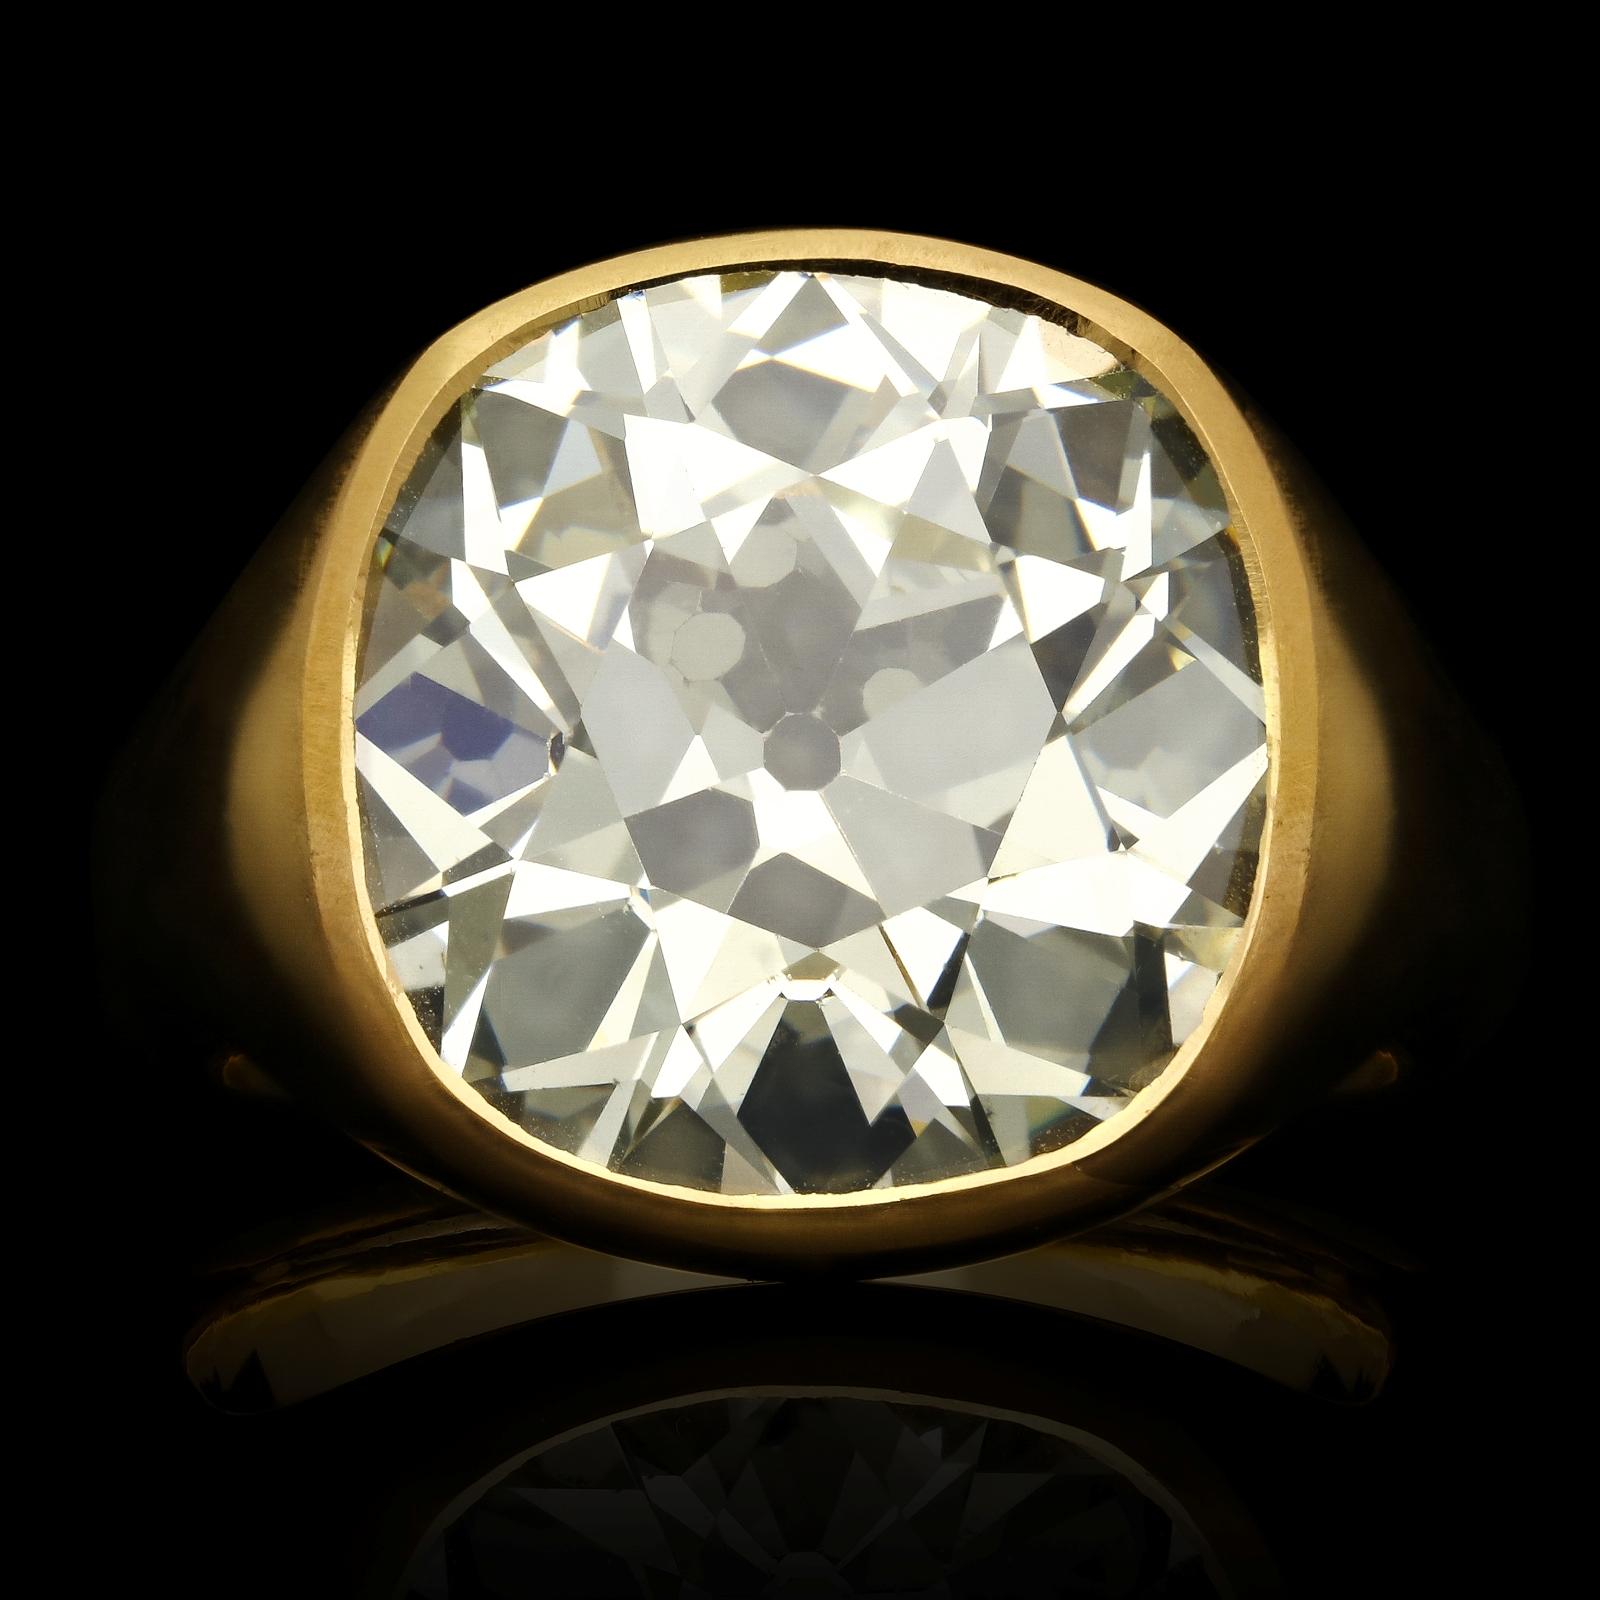 Spectacular 22ct yellow gold and old-cut diamond gypsy-set ring by Hancocks, set flush to the centre with a wonderfully bright and lively old mine cushion cut diamond weighing 15.80ct within a beautifully hand-crafted mount of rich 22ct yellow gold